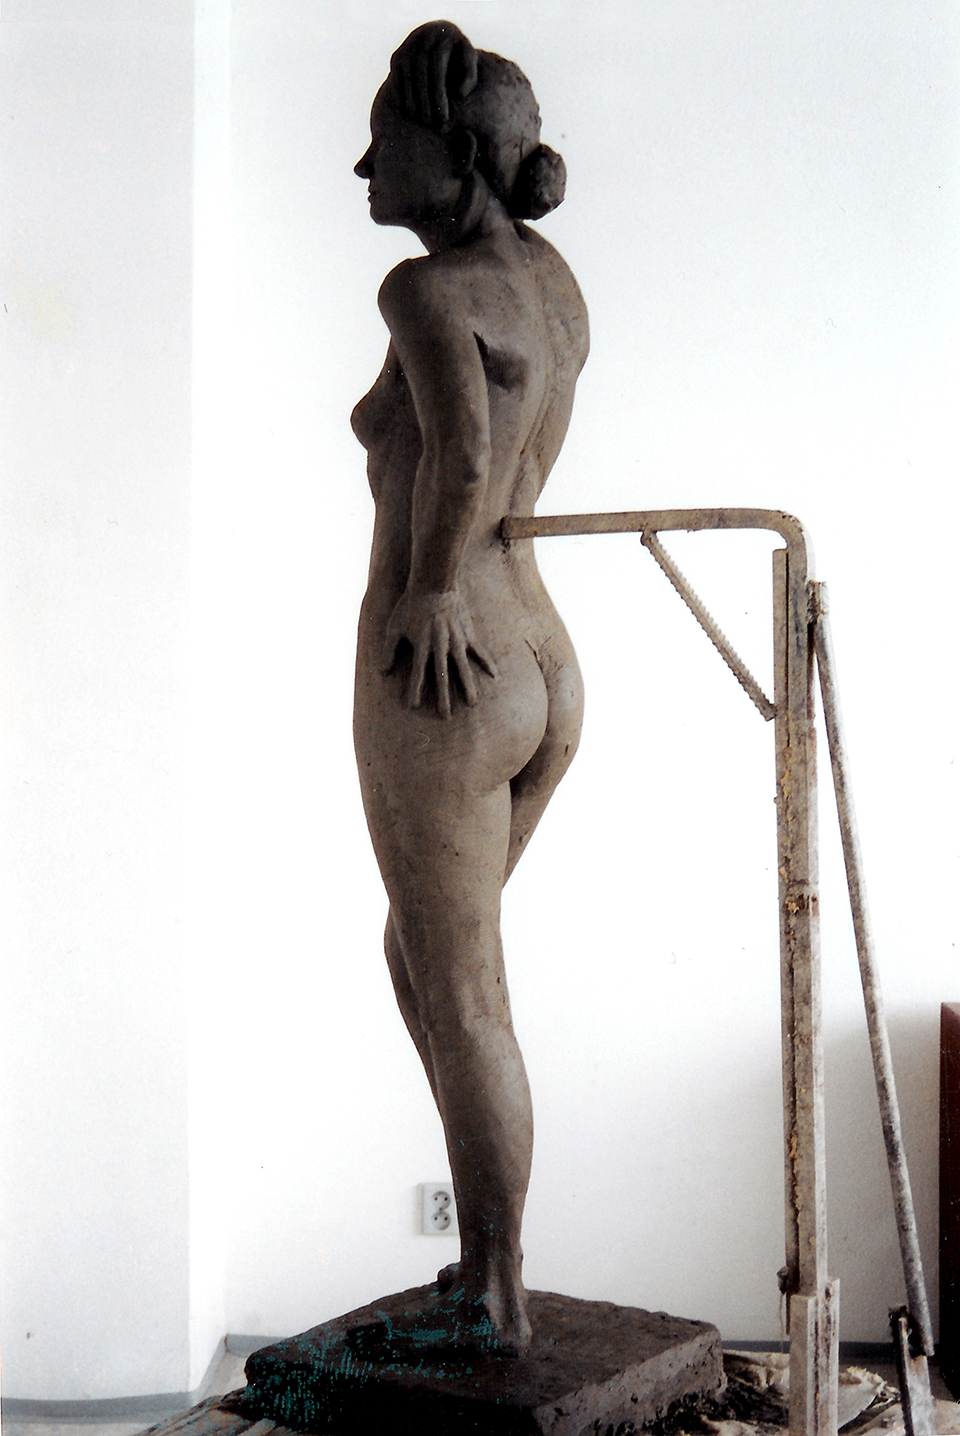 technique: clay dimensions: life size year: 2000